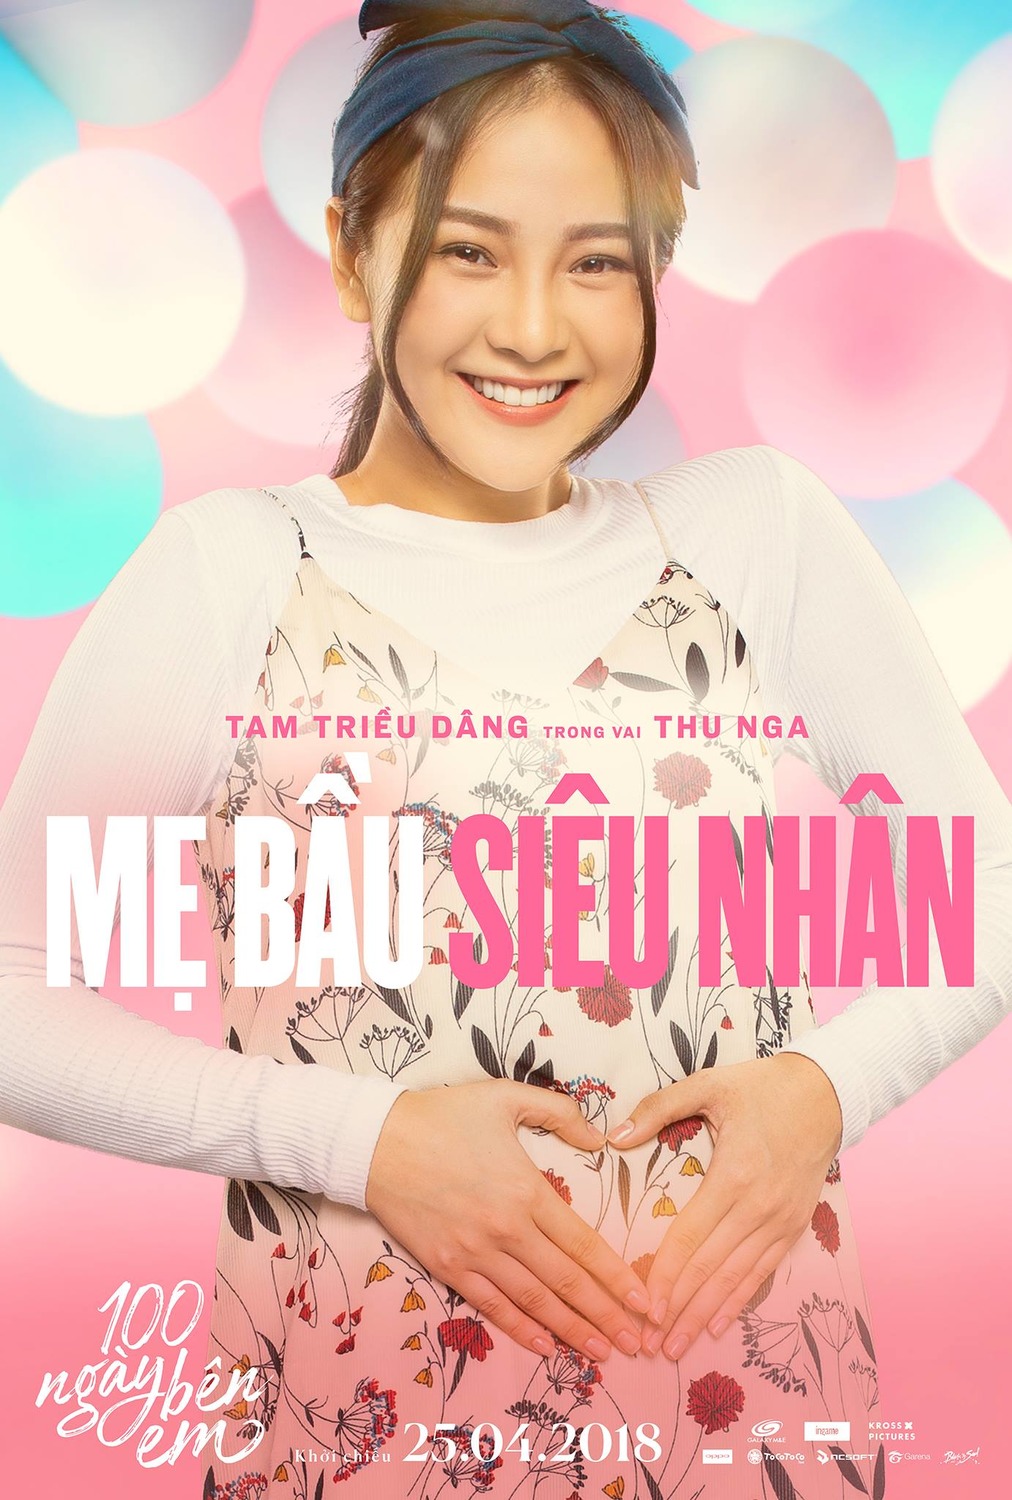 Extra Large Movie Poster Image for 100 Ngày Bên Em (#4 of 9)